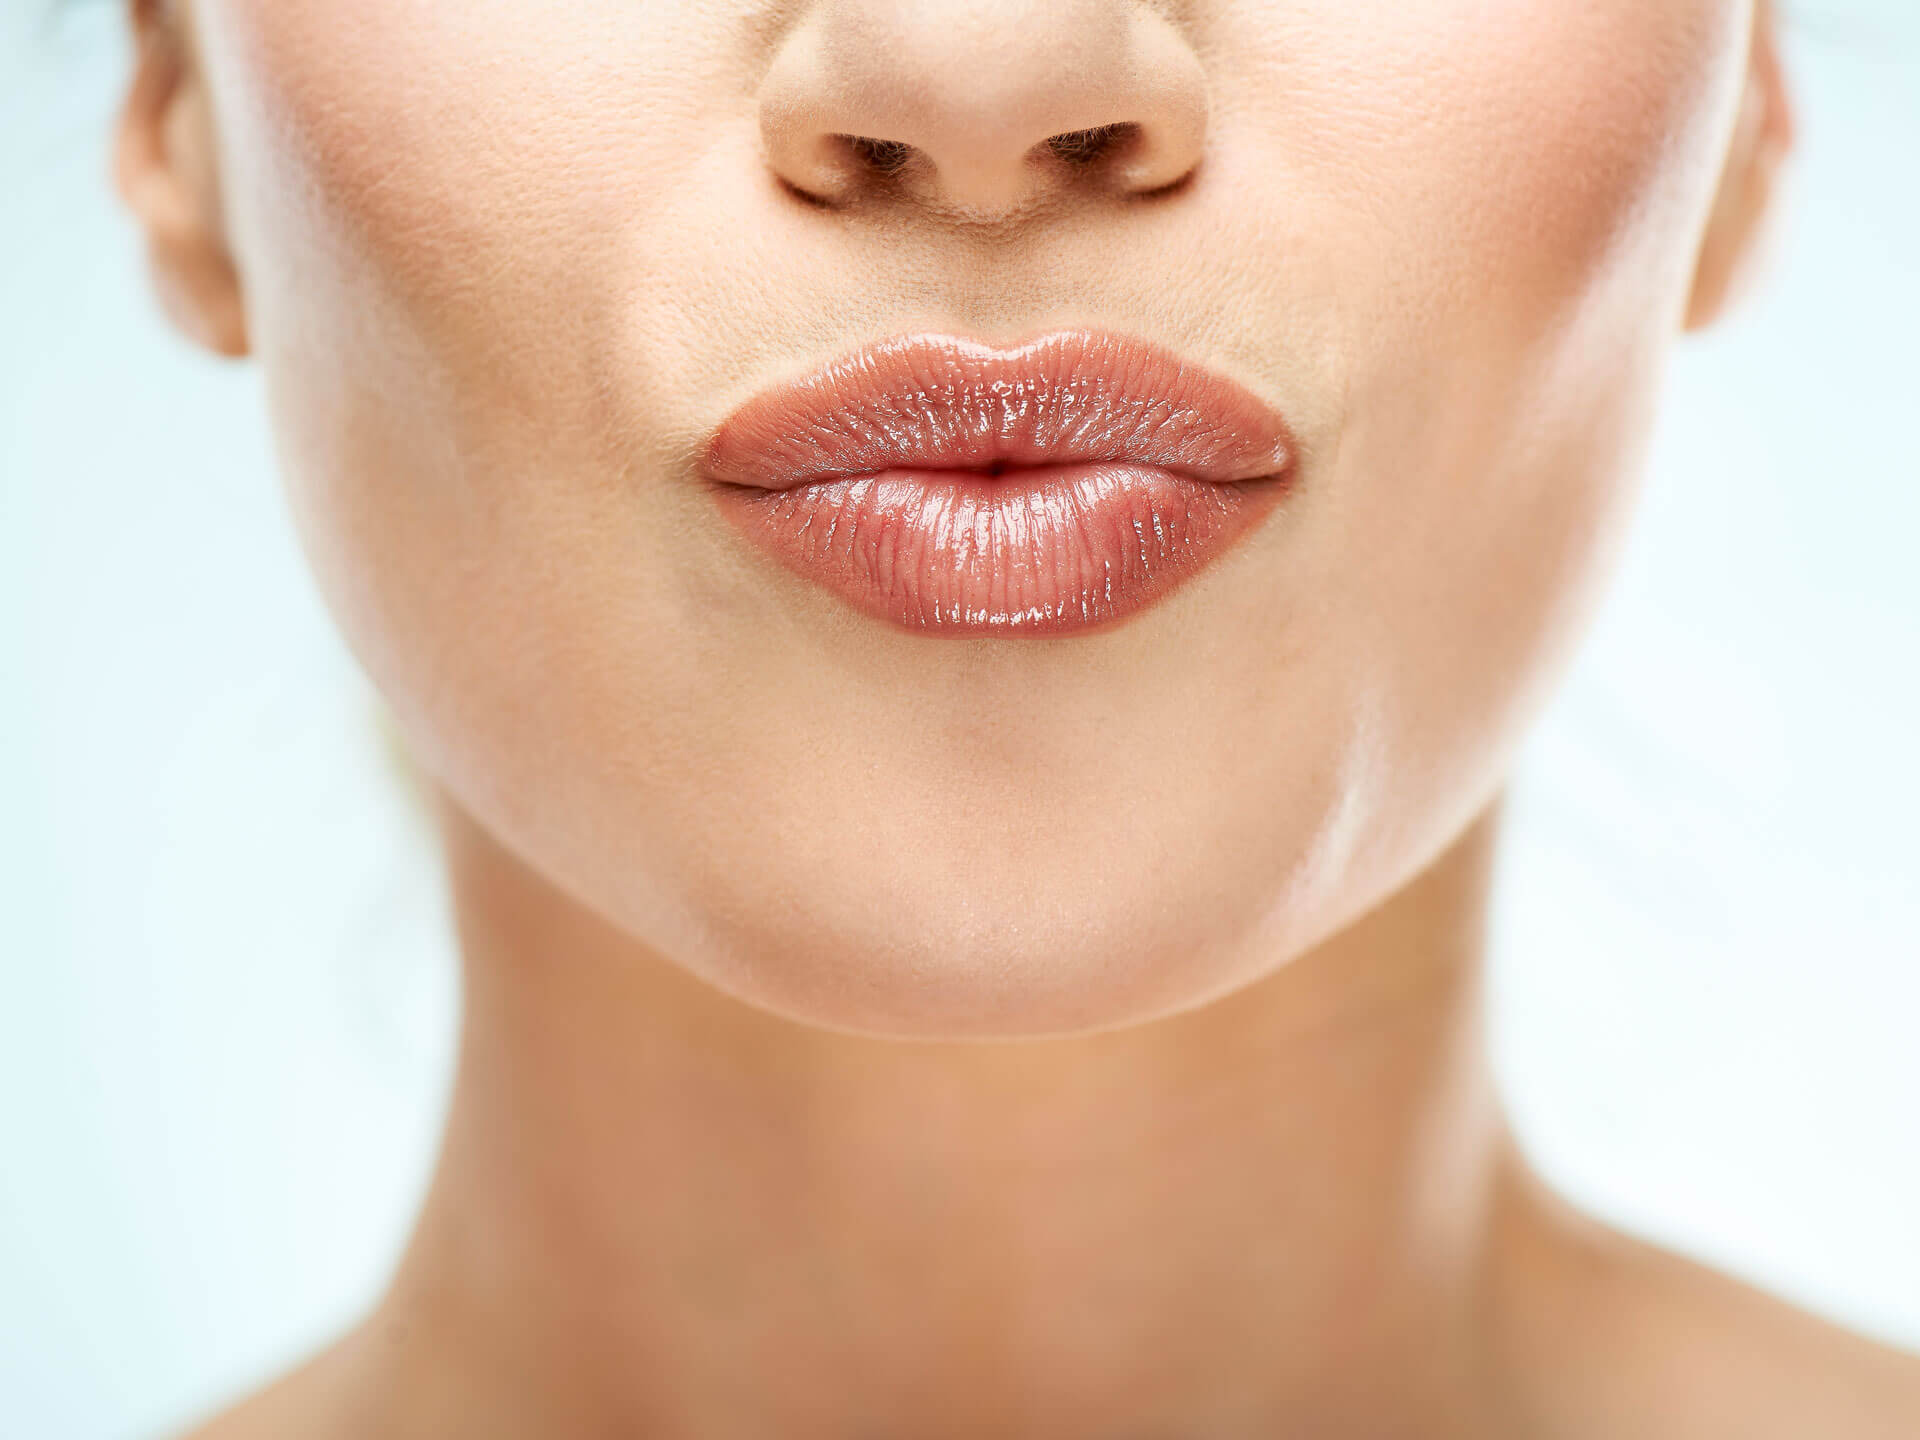 A close up of a woman's plump lips